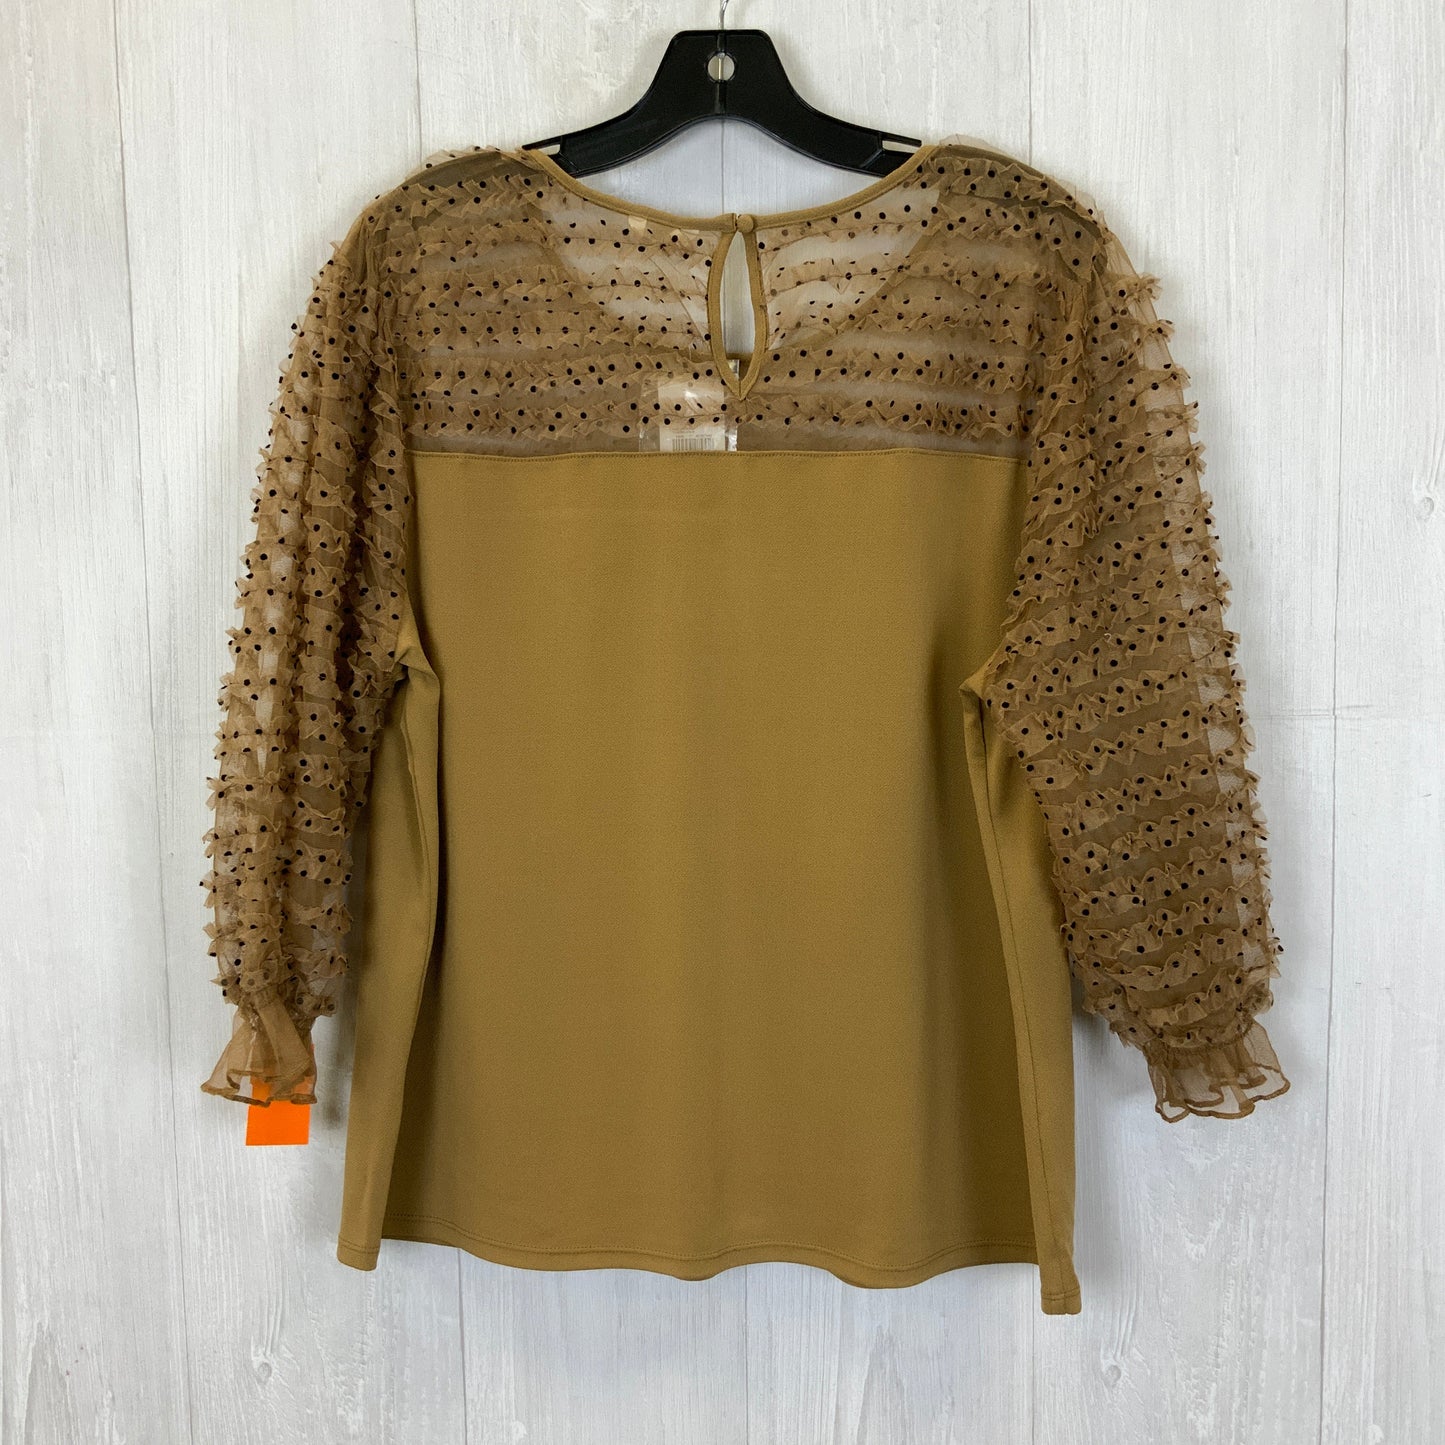 Tan Top 3/4 Sleeve Cato, Size Xl